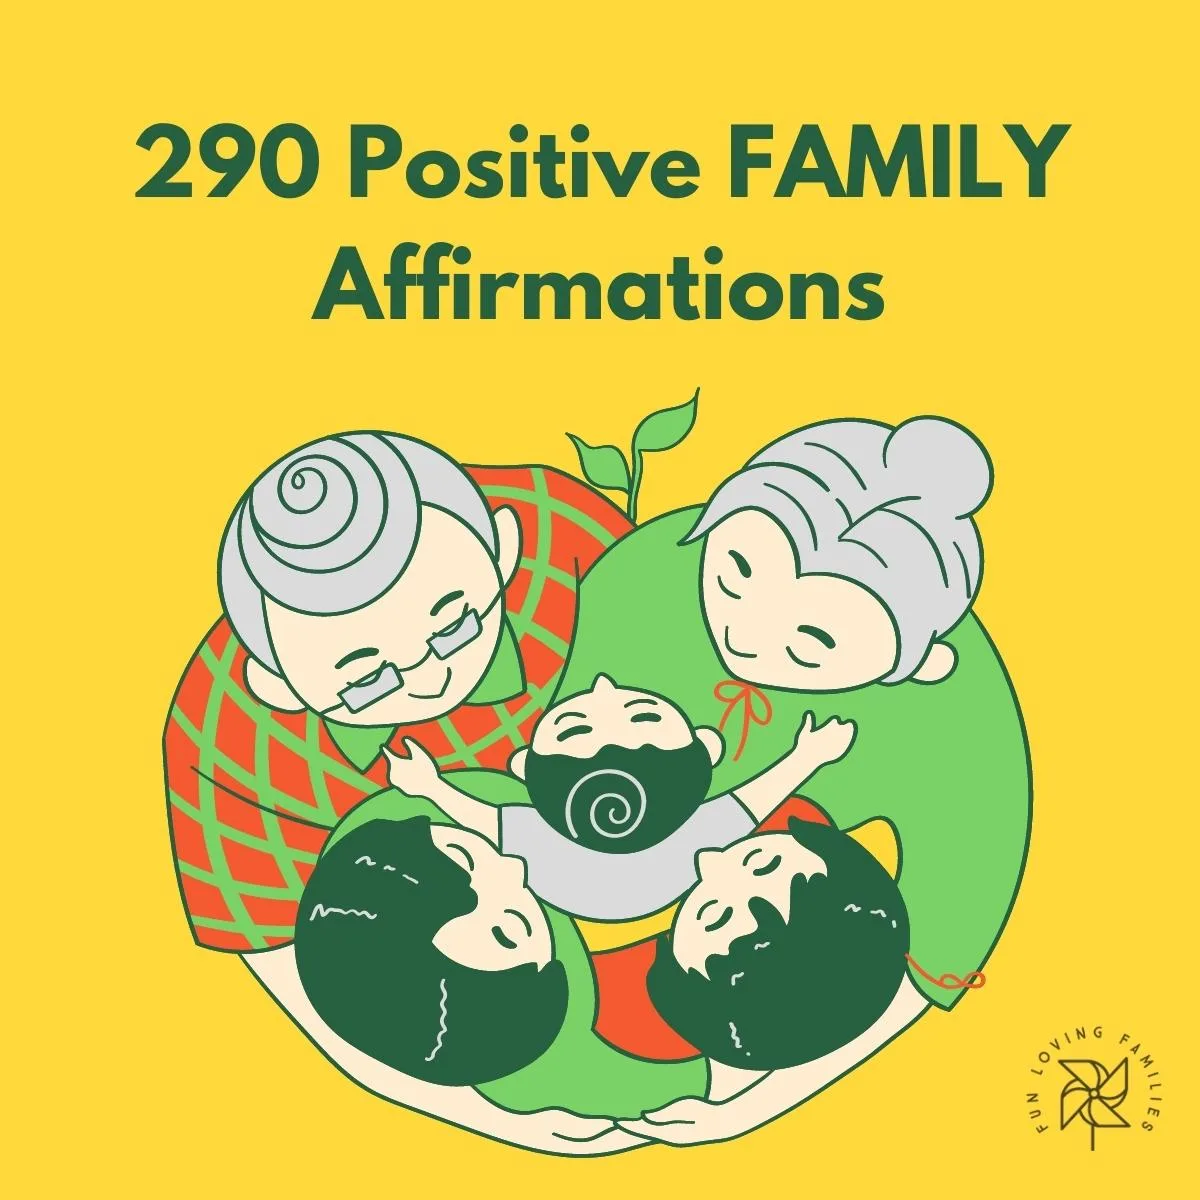 affirmations about loved ones